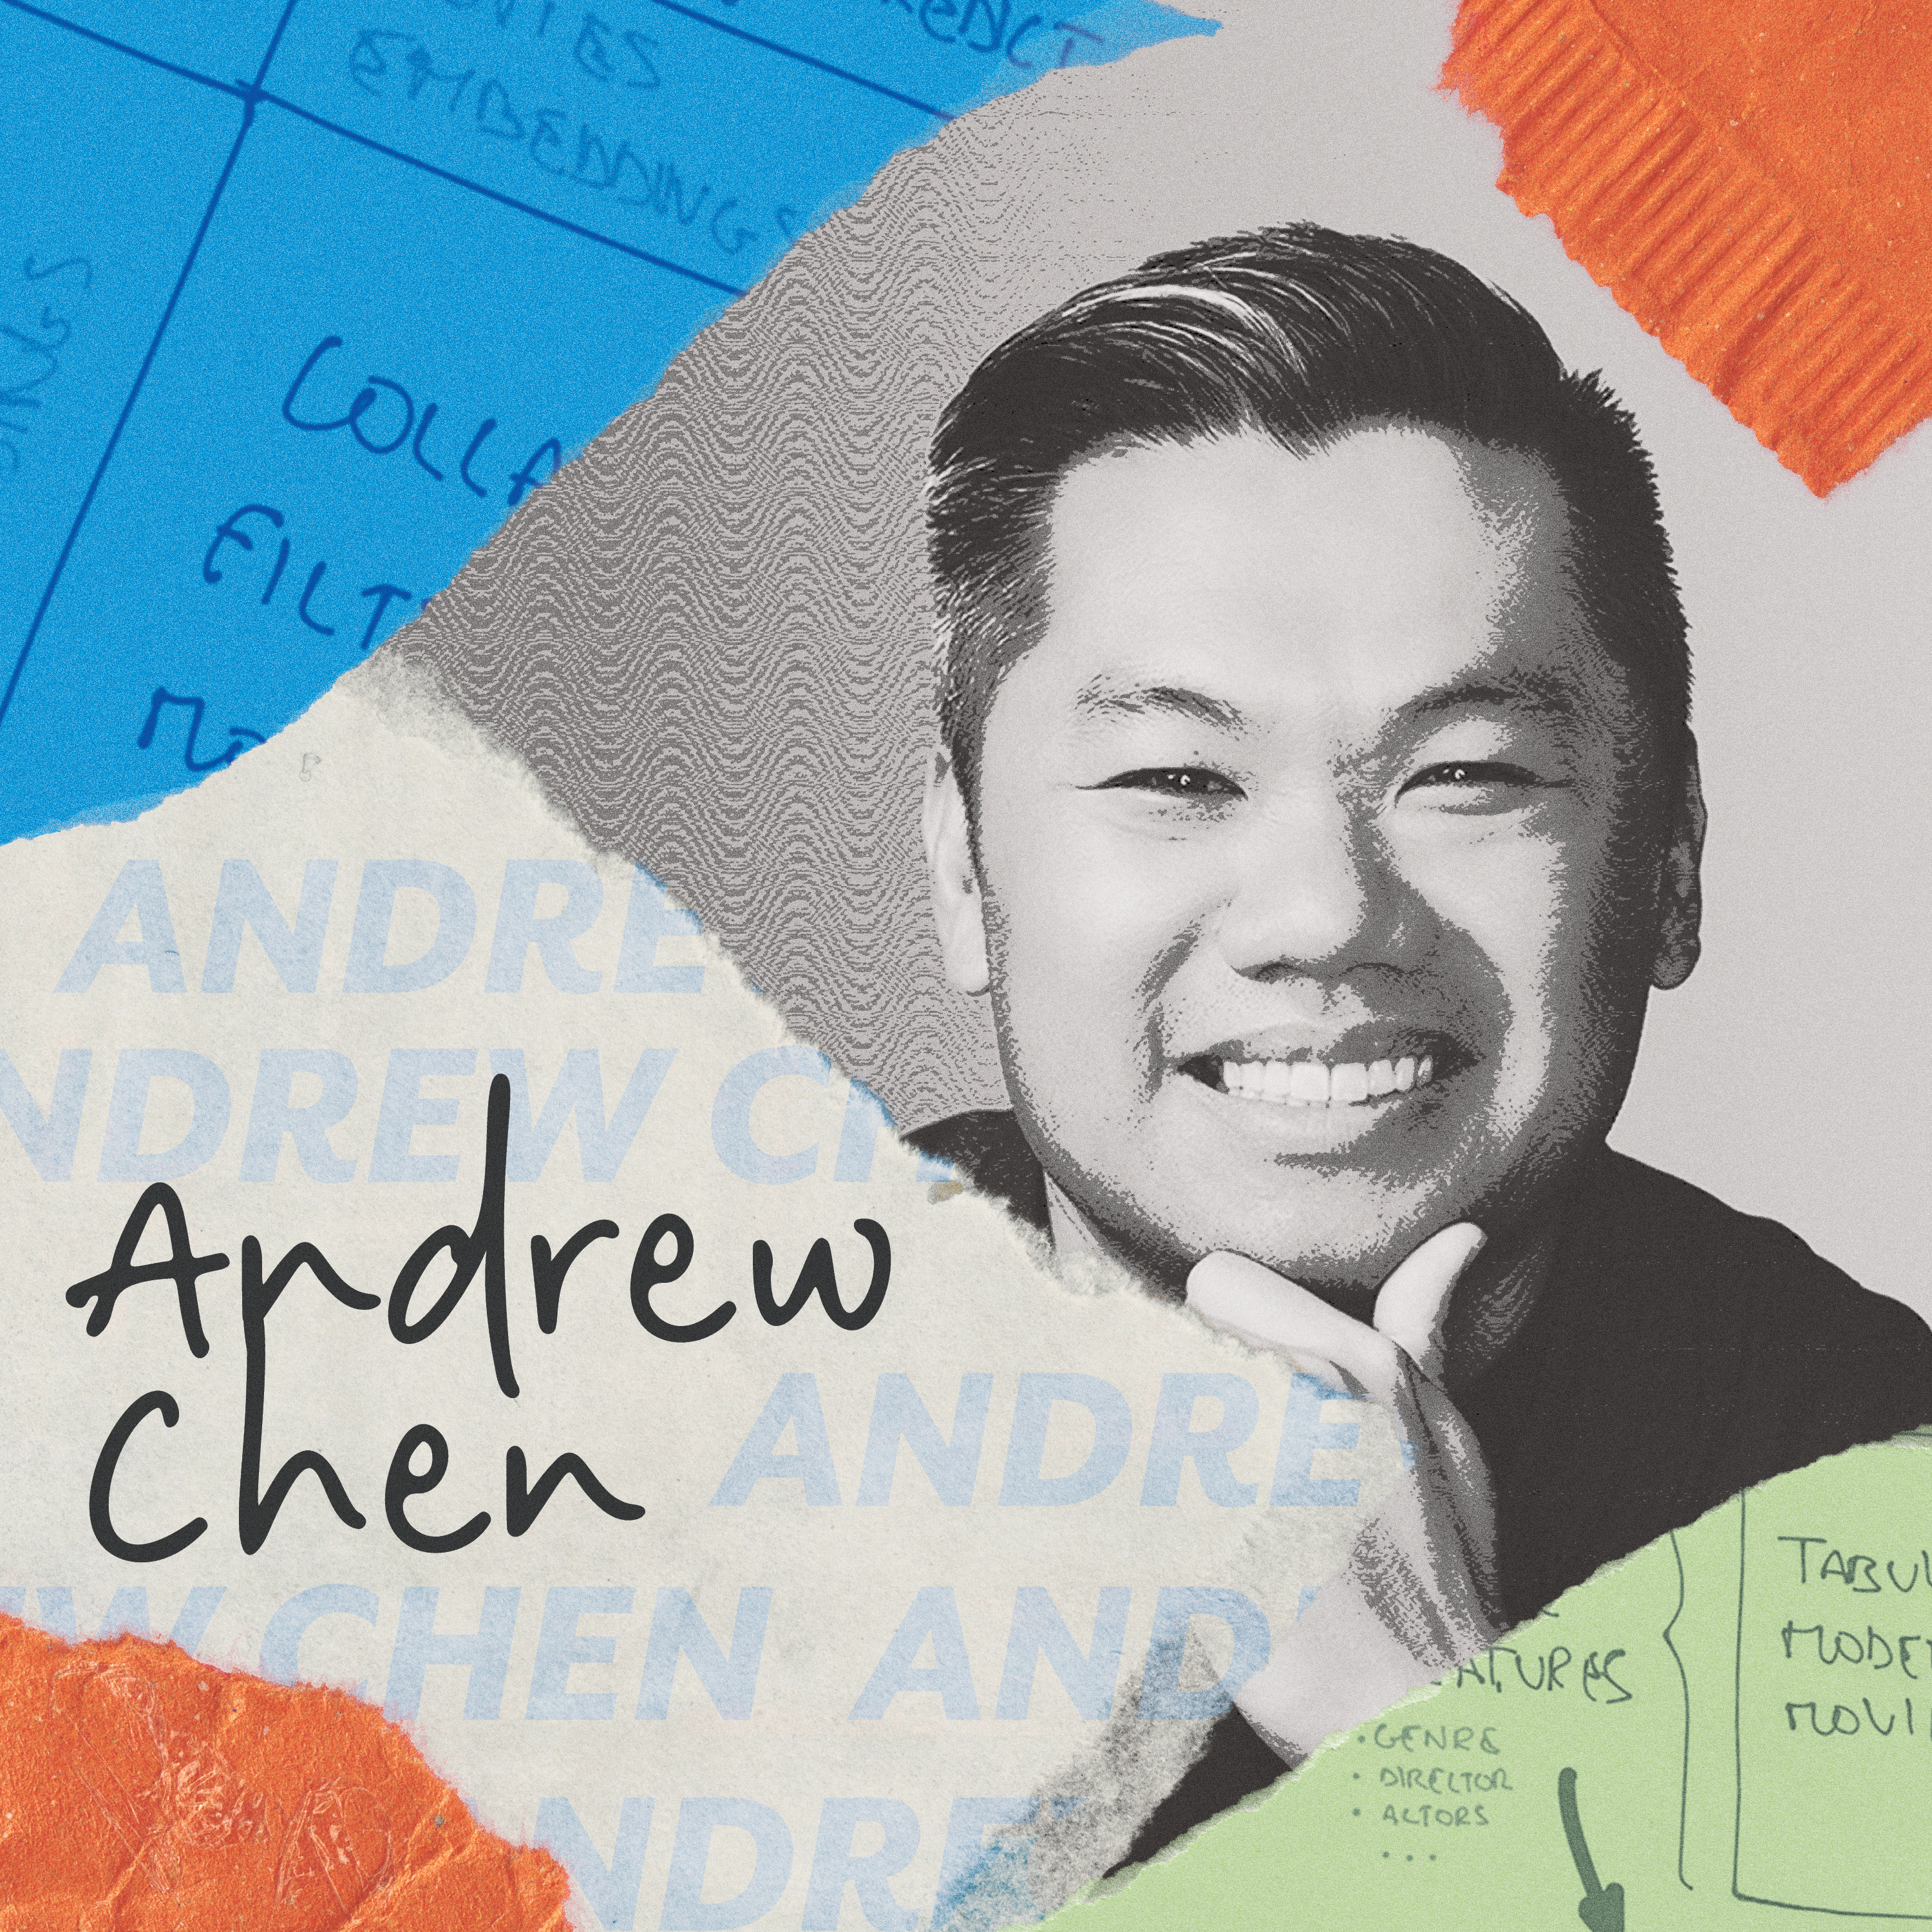 Andrew Chen on how tech’s giants drive growth with network effects